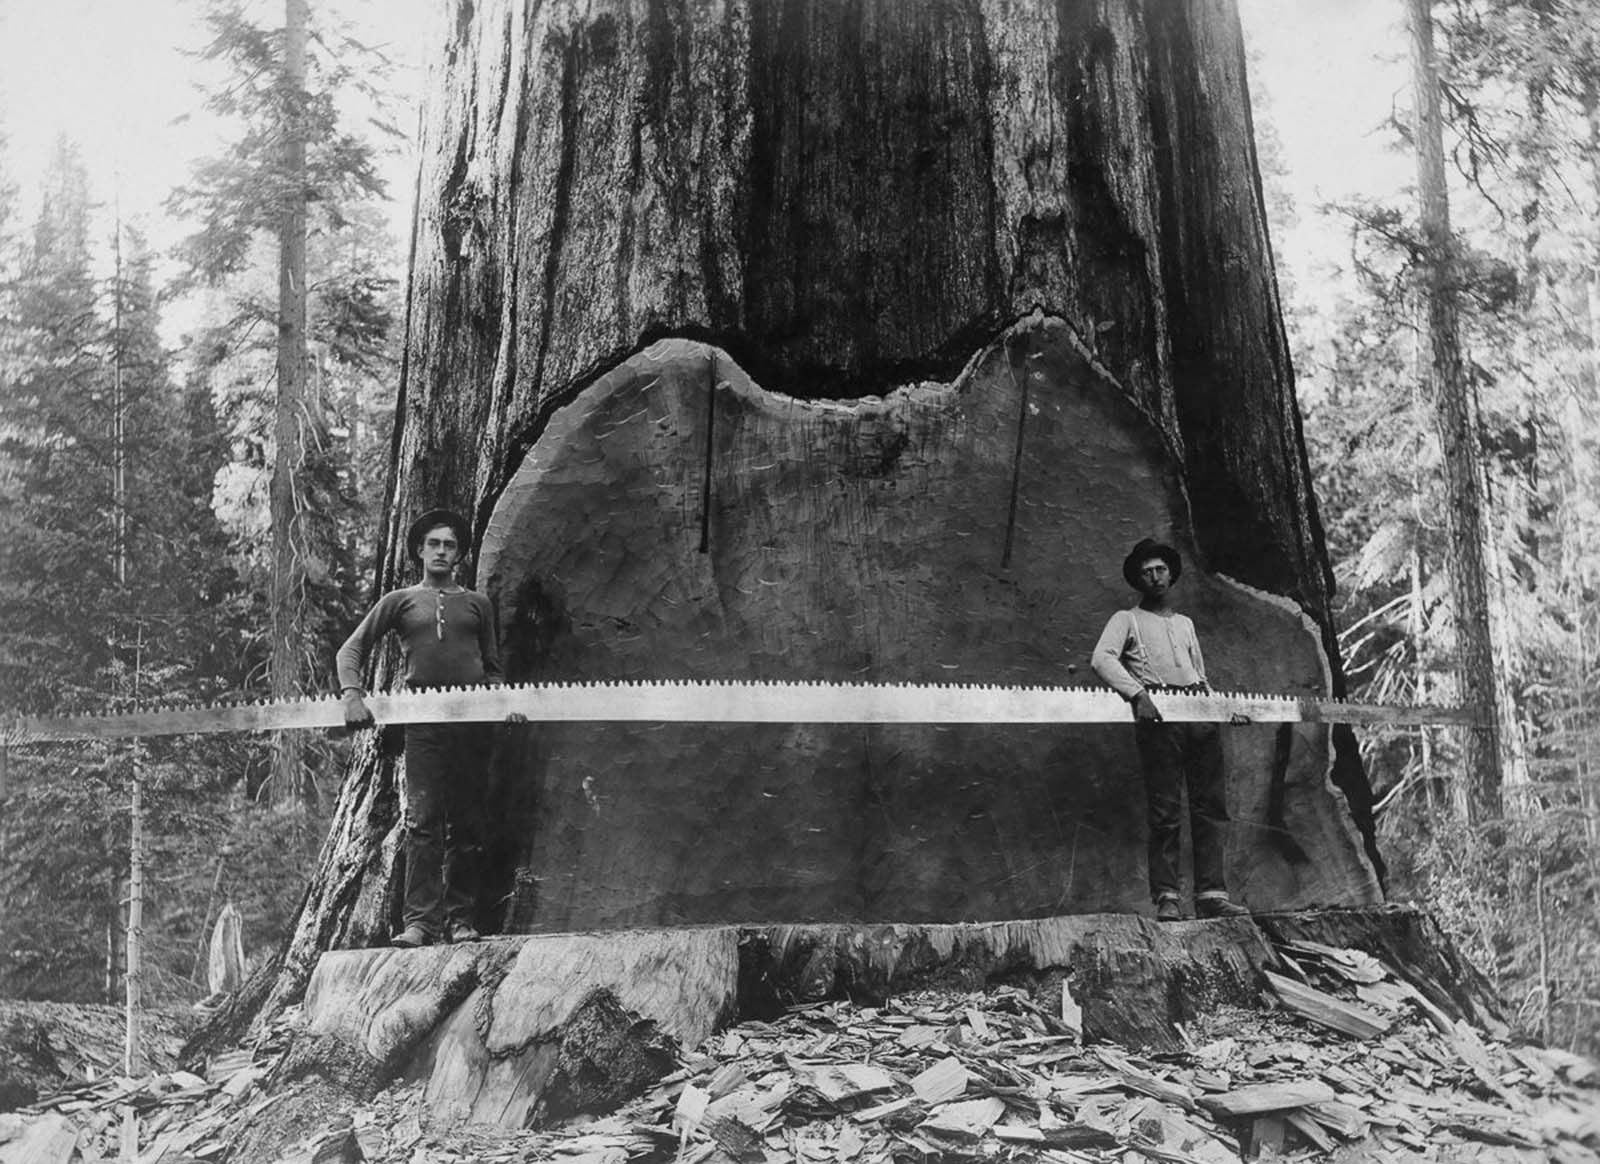 Loggers hold a cross-cut saw across a giant Sequoia tree’s trunk in California, 1917.